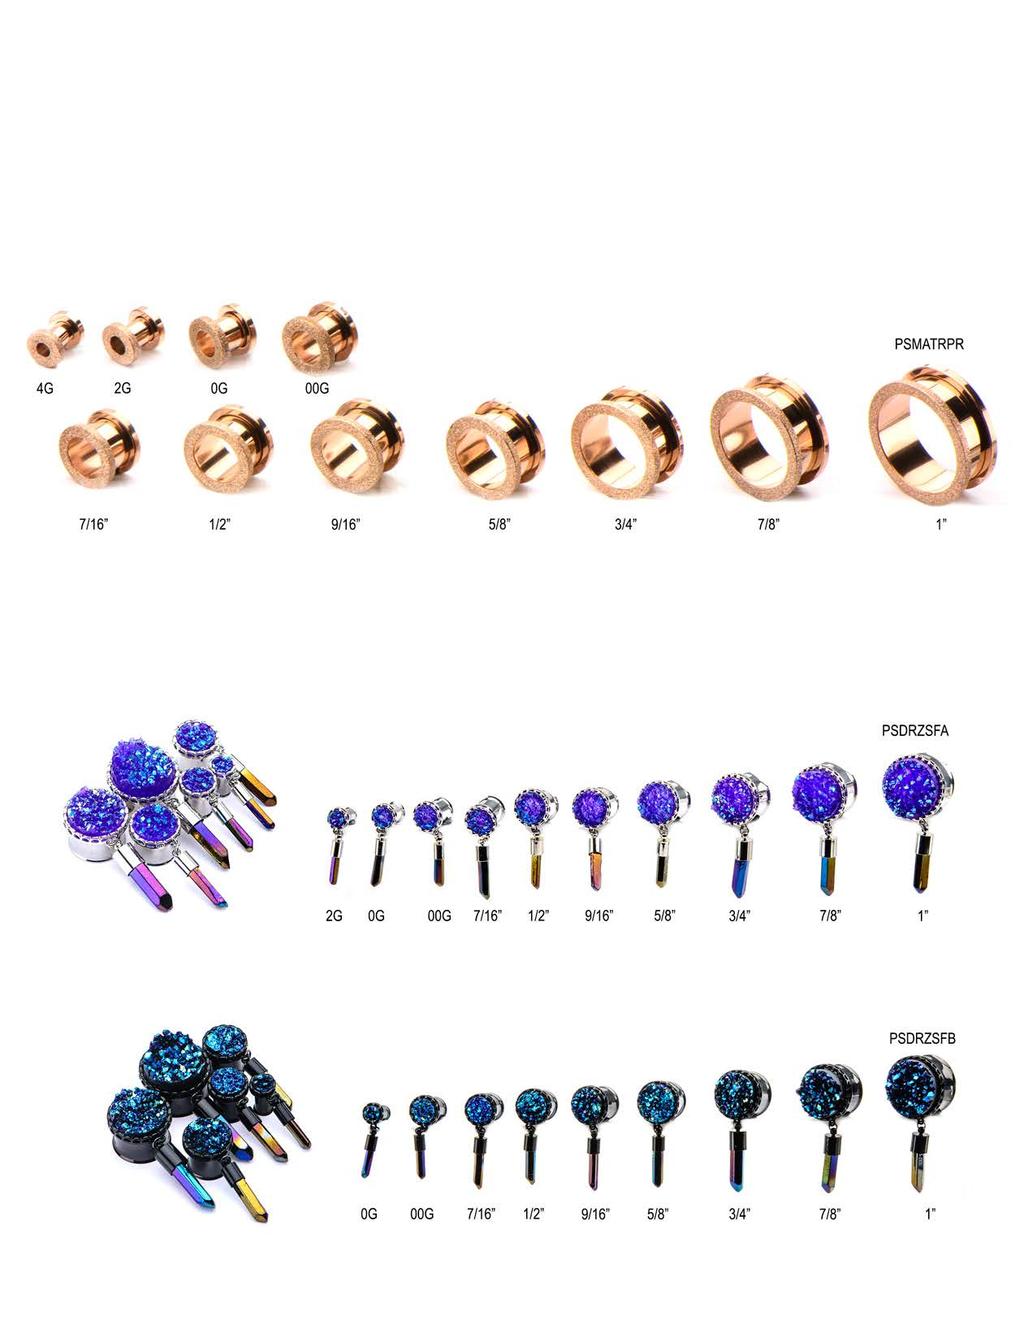 DIAMOND DUST ROSE GOLD TUNNELS High end body jewelry is in right now. These screw fit rose gold plated tunnels with Diamond Dust accent will fit the bill.